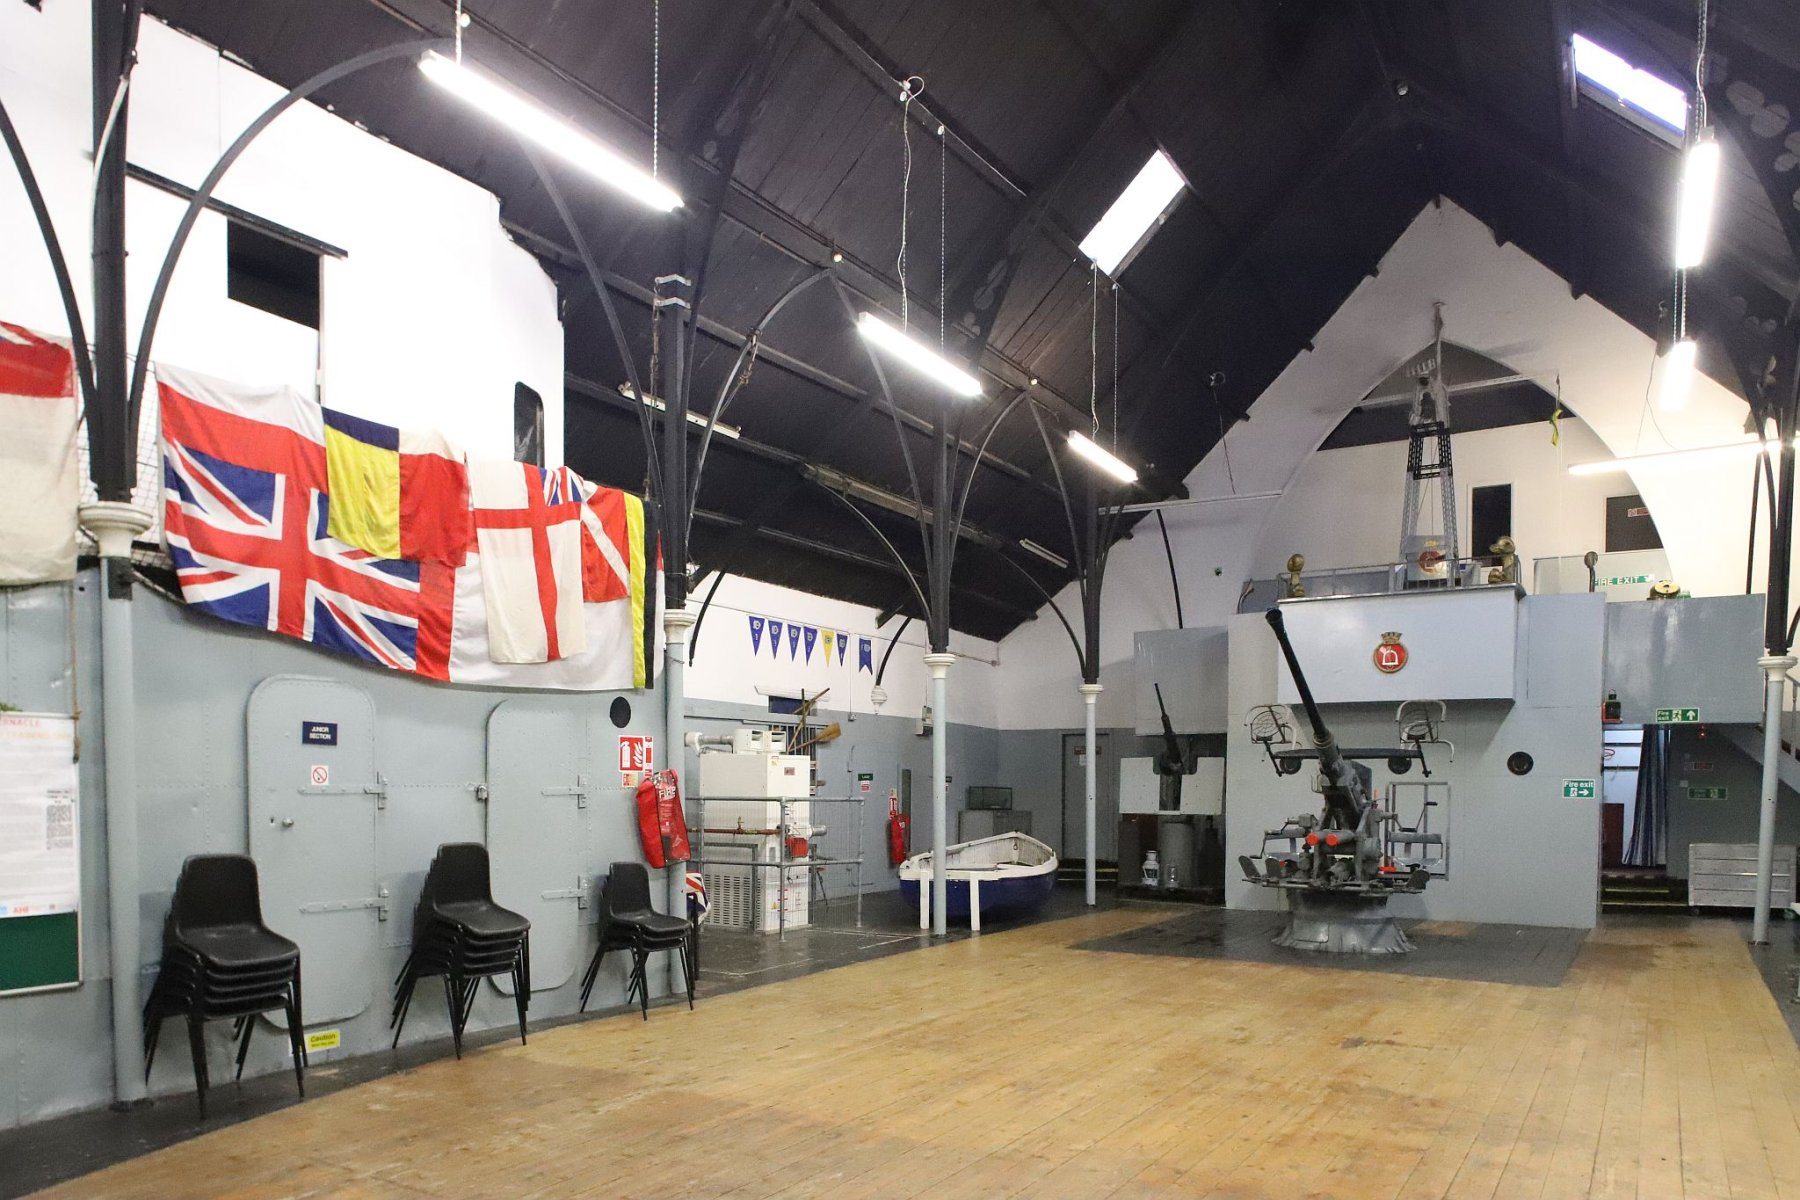 Interior of the Kilburn Tin Tabernacle church (Cambridge Avenue, London) fitted out as a Royal Navy Ton Class ship by Sea Cadets of TS Bicester